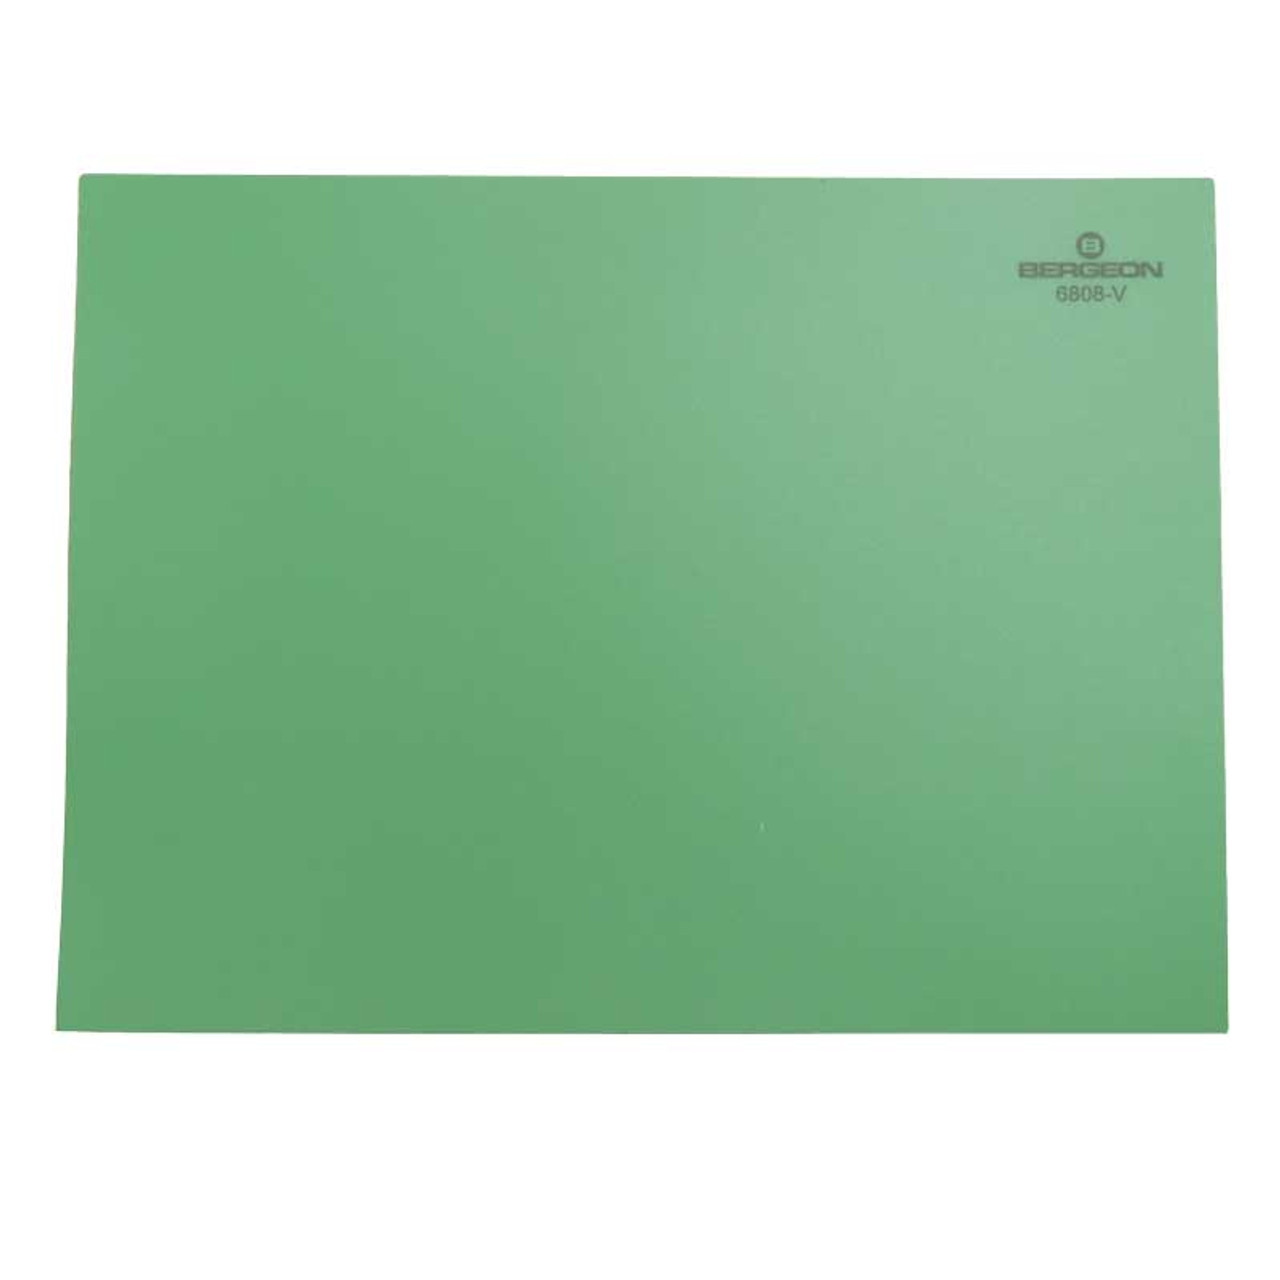 Bergeon GREEN 6808 Work Pad Bench Mat Plastic with Adhesive Backing 9.5 x  12.5 Inches